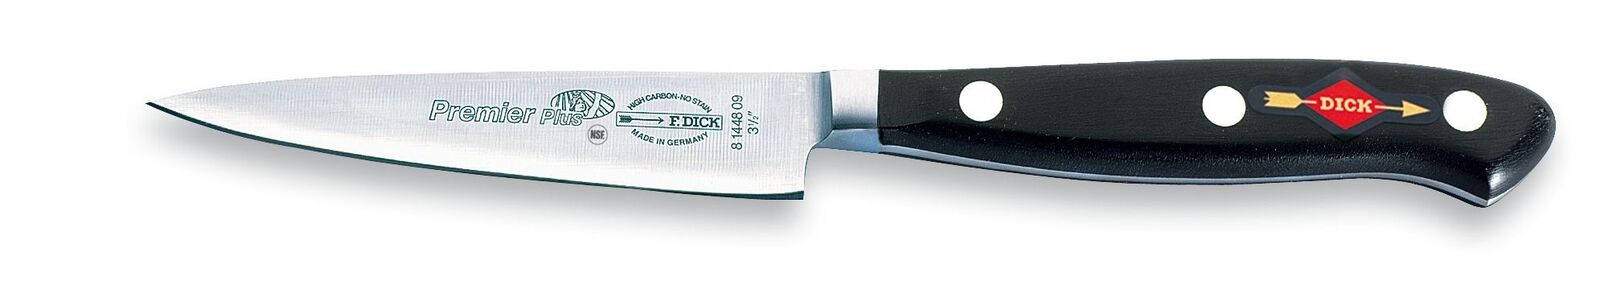 F. Dick (8144809) 3 1/2" Paring Knife, EURASIA Series, Forged-cityfoodequipment.com